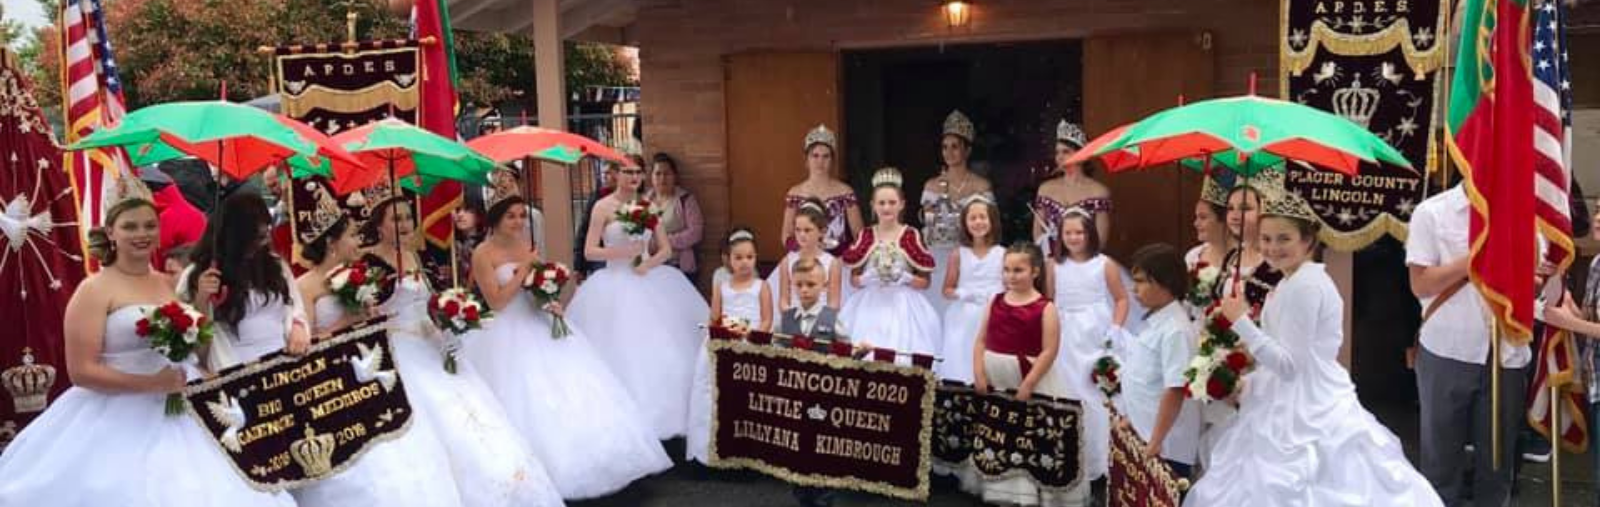 parade princesses standing in front of building